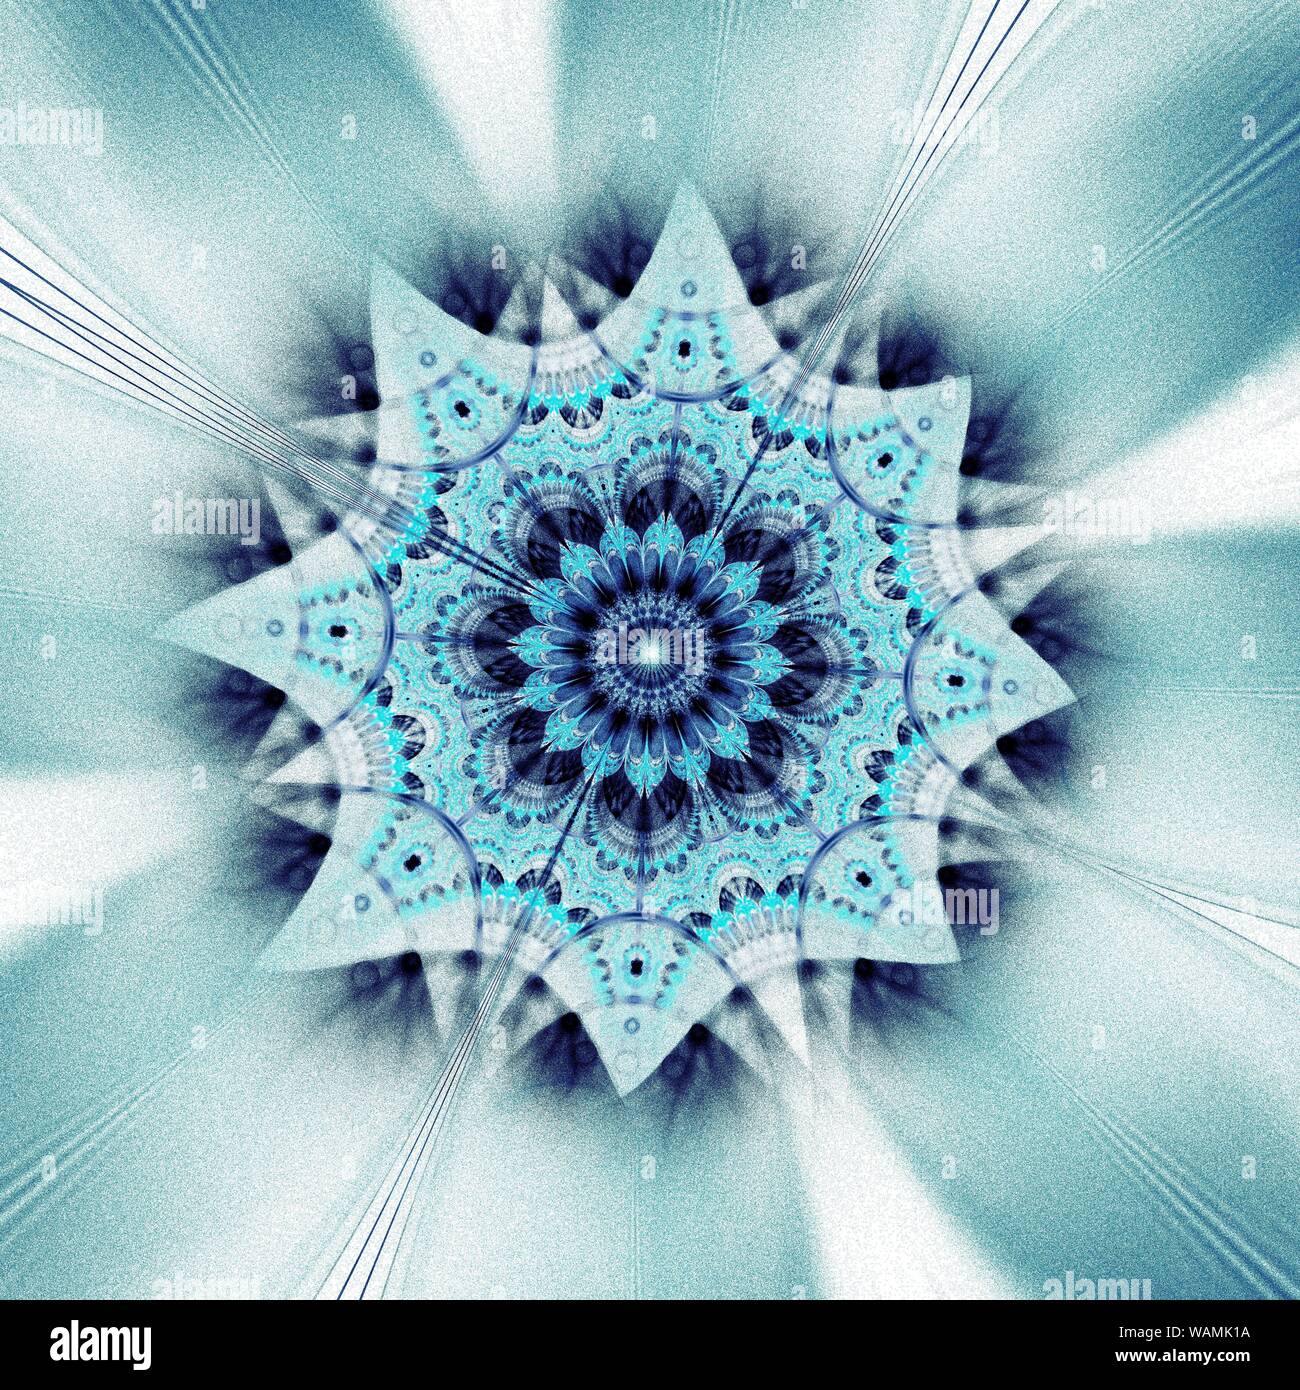 Beautiful Symmetrical Fractal Blue Mandala Flower Or Butterfly Digital Artwork For Creative Graphic Design Computer Generated Graphics Stock Photo Alamy,Cupboard Modern Wardrobe With Dressing Table Designs For Bedroom Indian